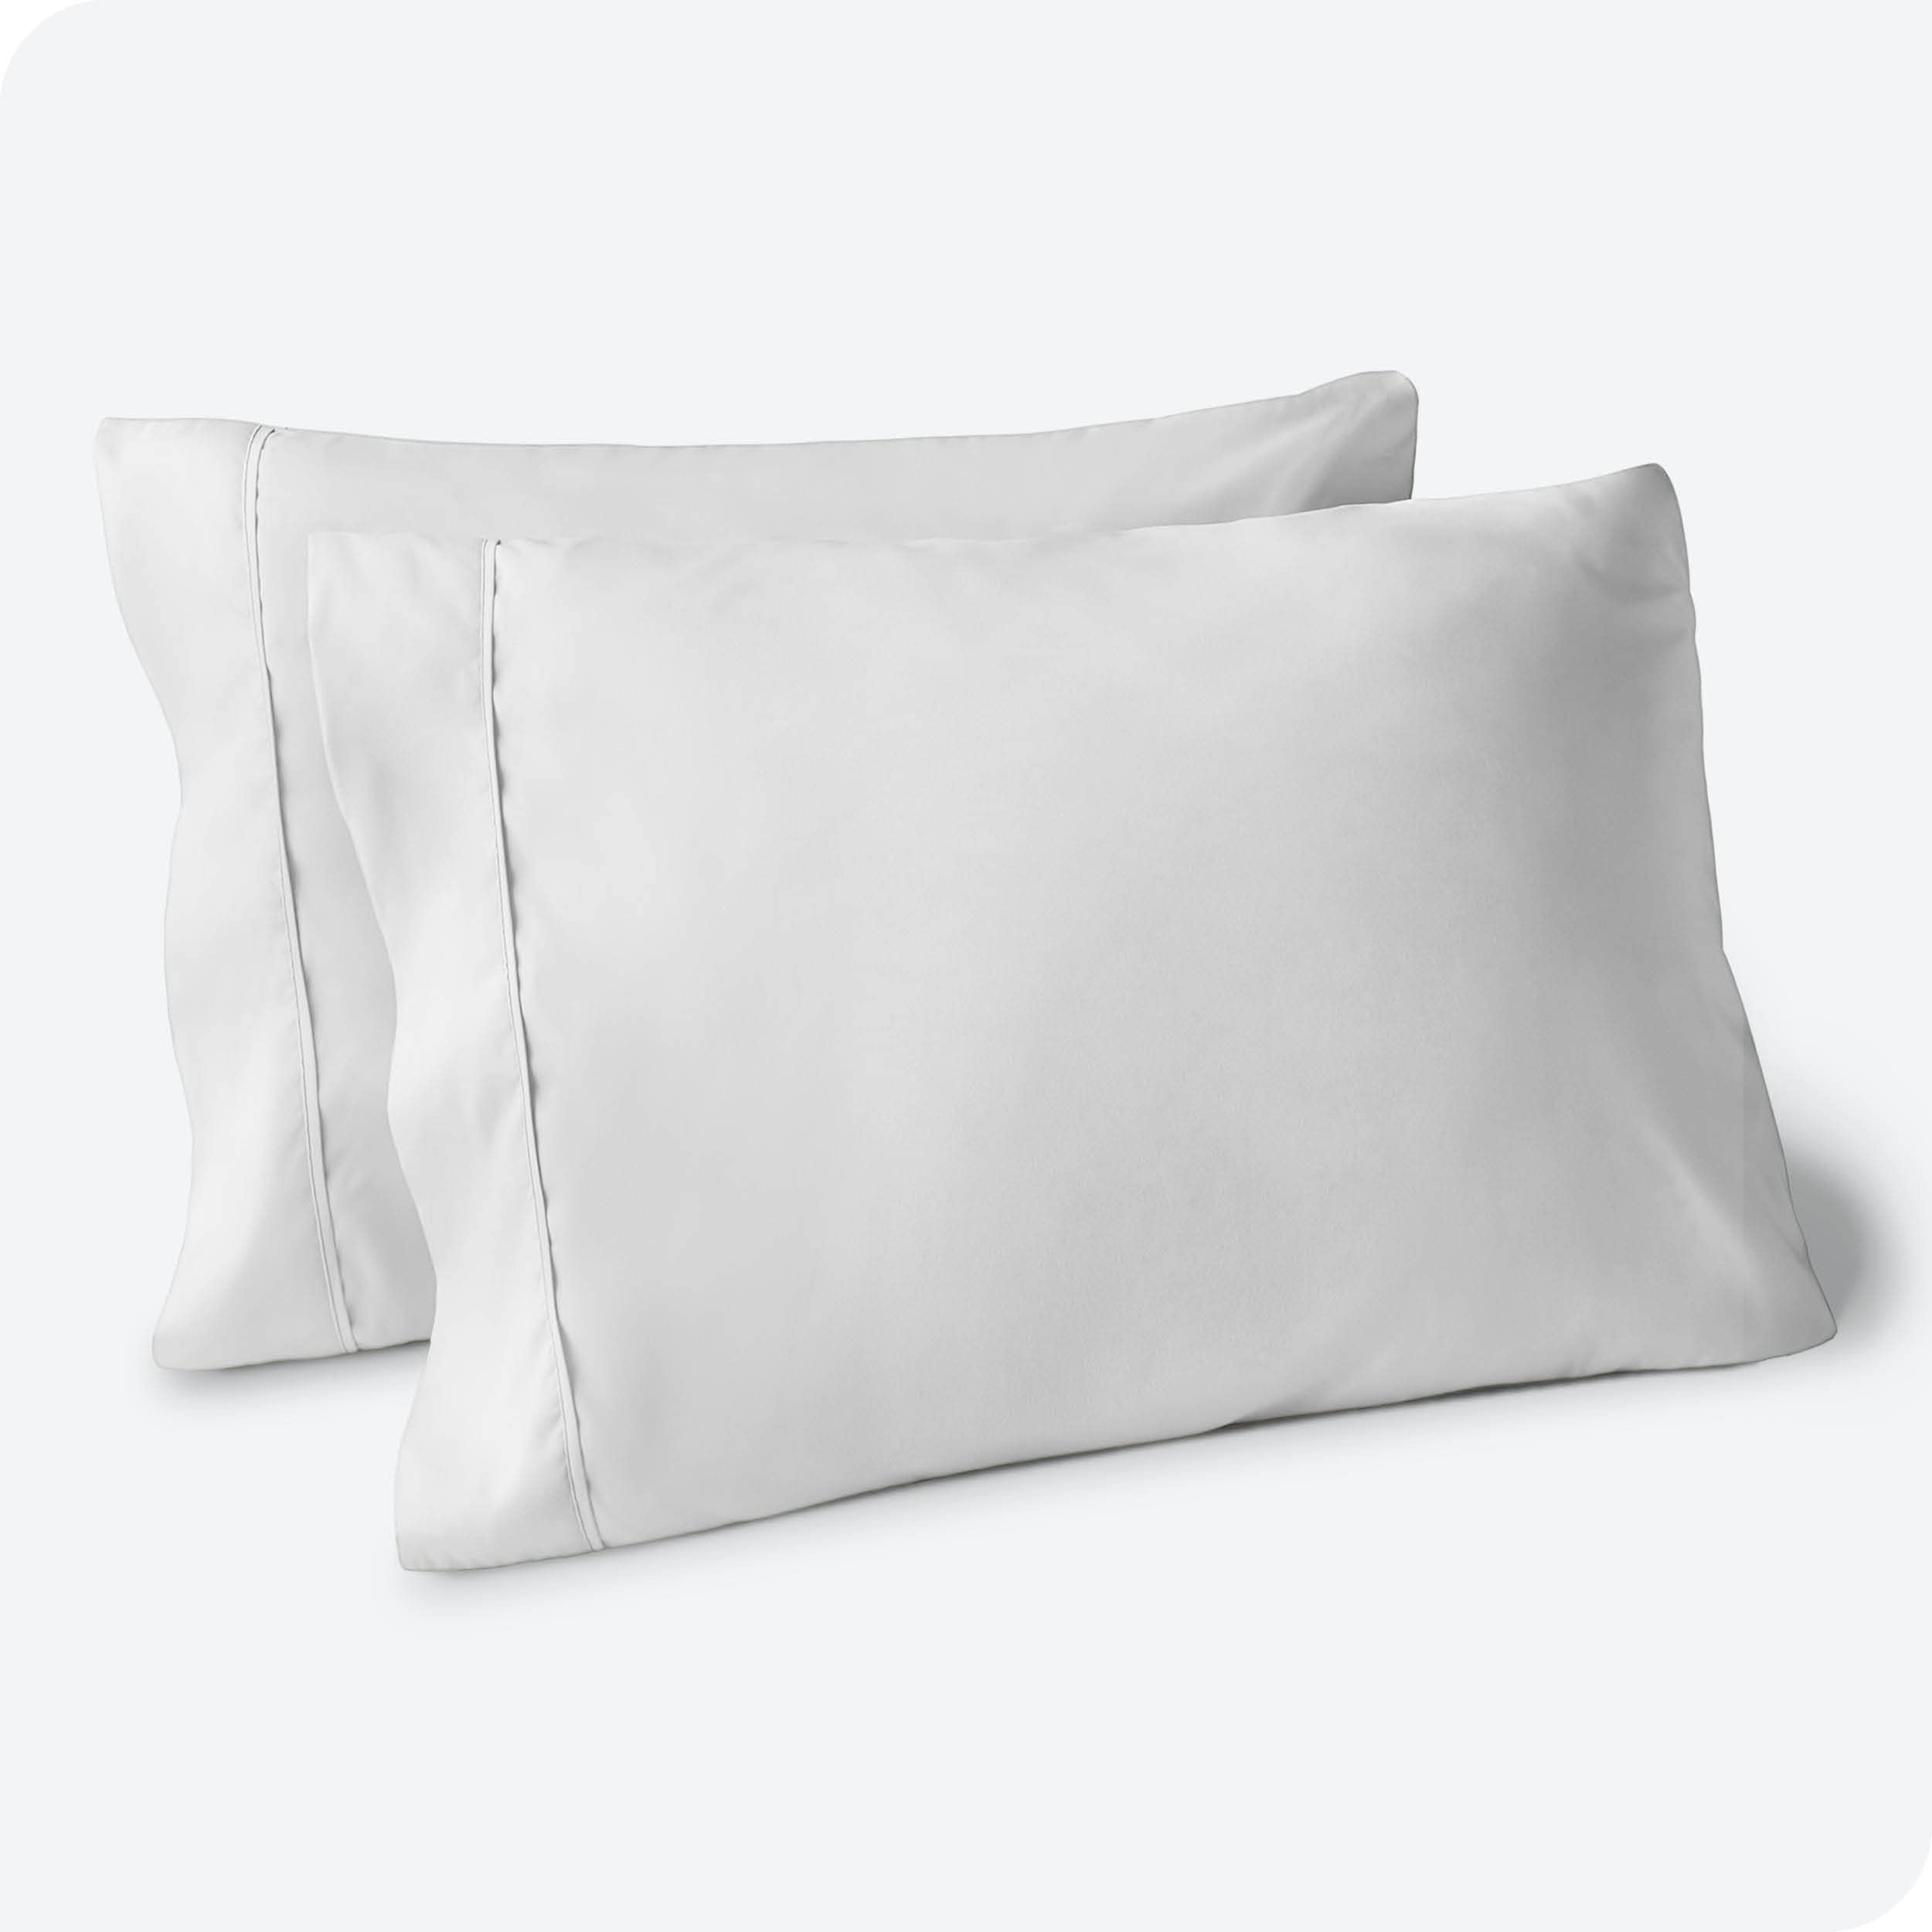 Book Cover Bare Home Microfiber Pillow Cases - King Size Set of 2 - Cooling Pillowcases - Double Brushed - White Pillowcases 2 Pack - Easy Care (King Pillowcase Set of 2, White) 20x40 King (2 Pack) 01 - White